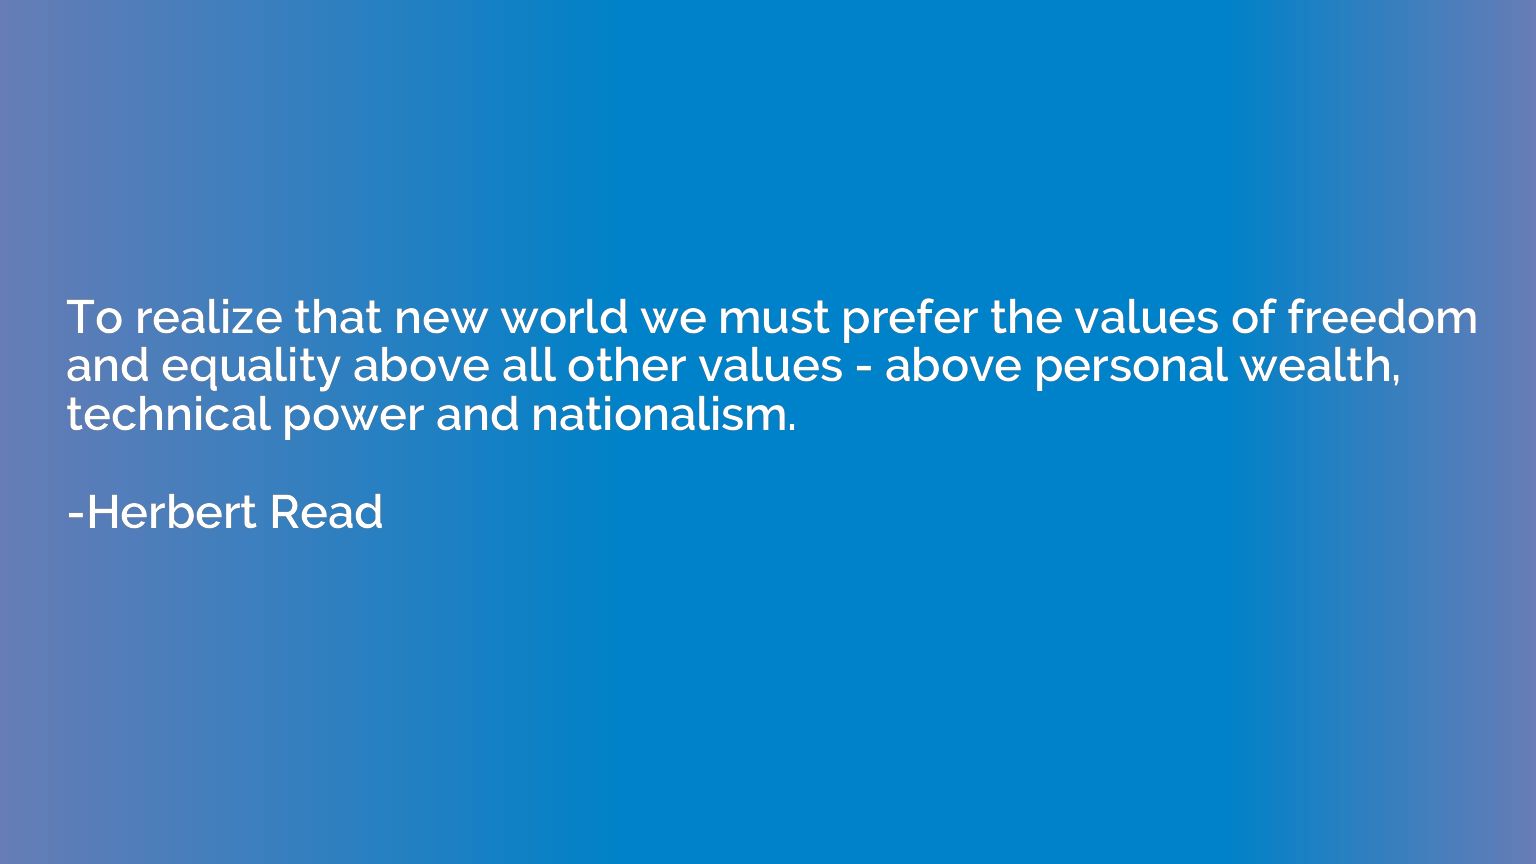 To realize that new world we must prefer the values of freed